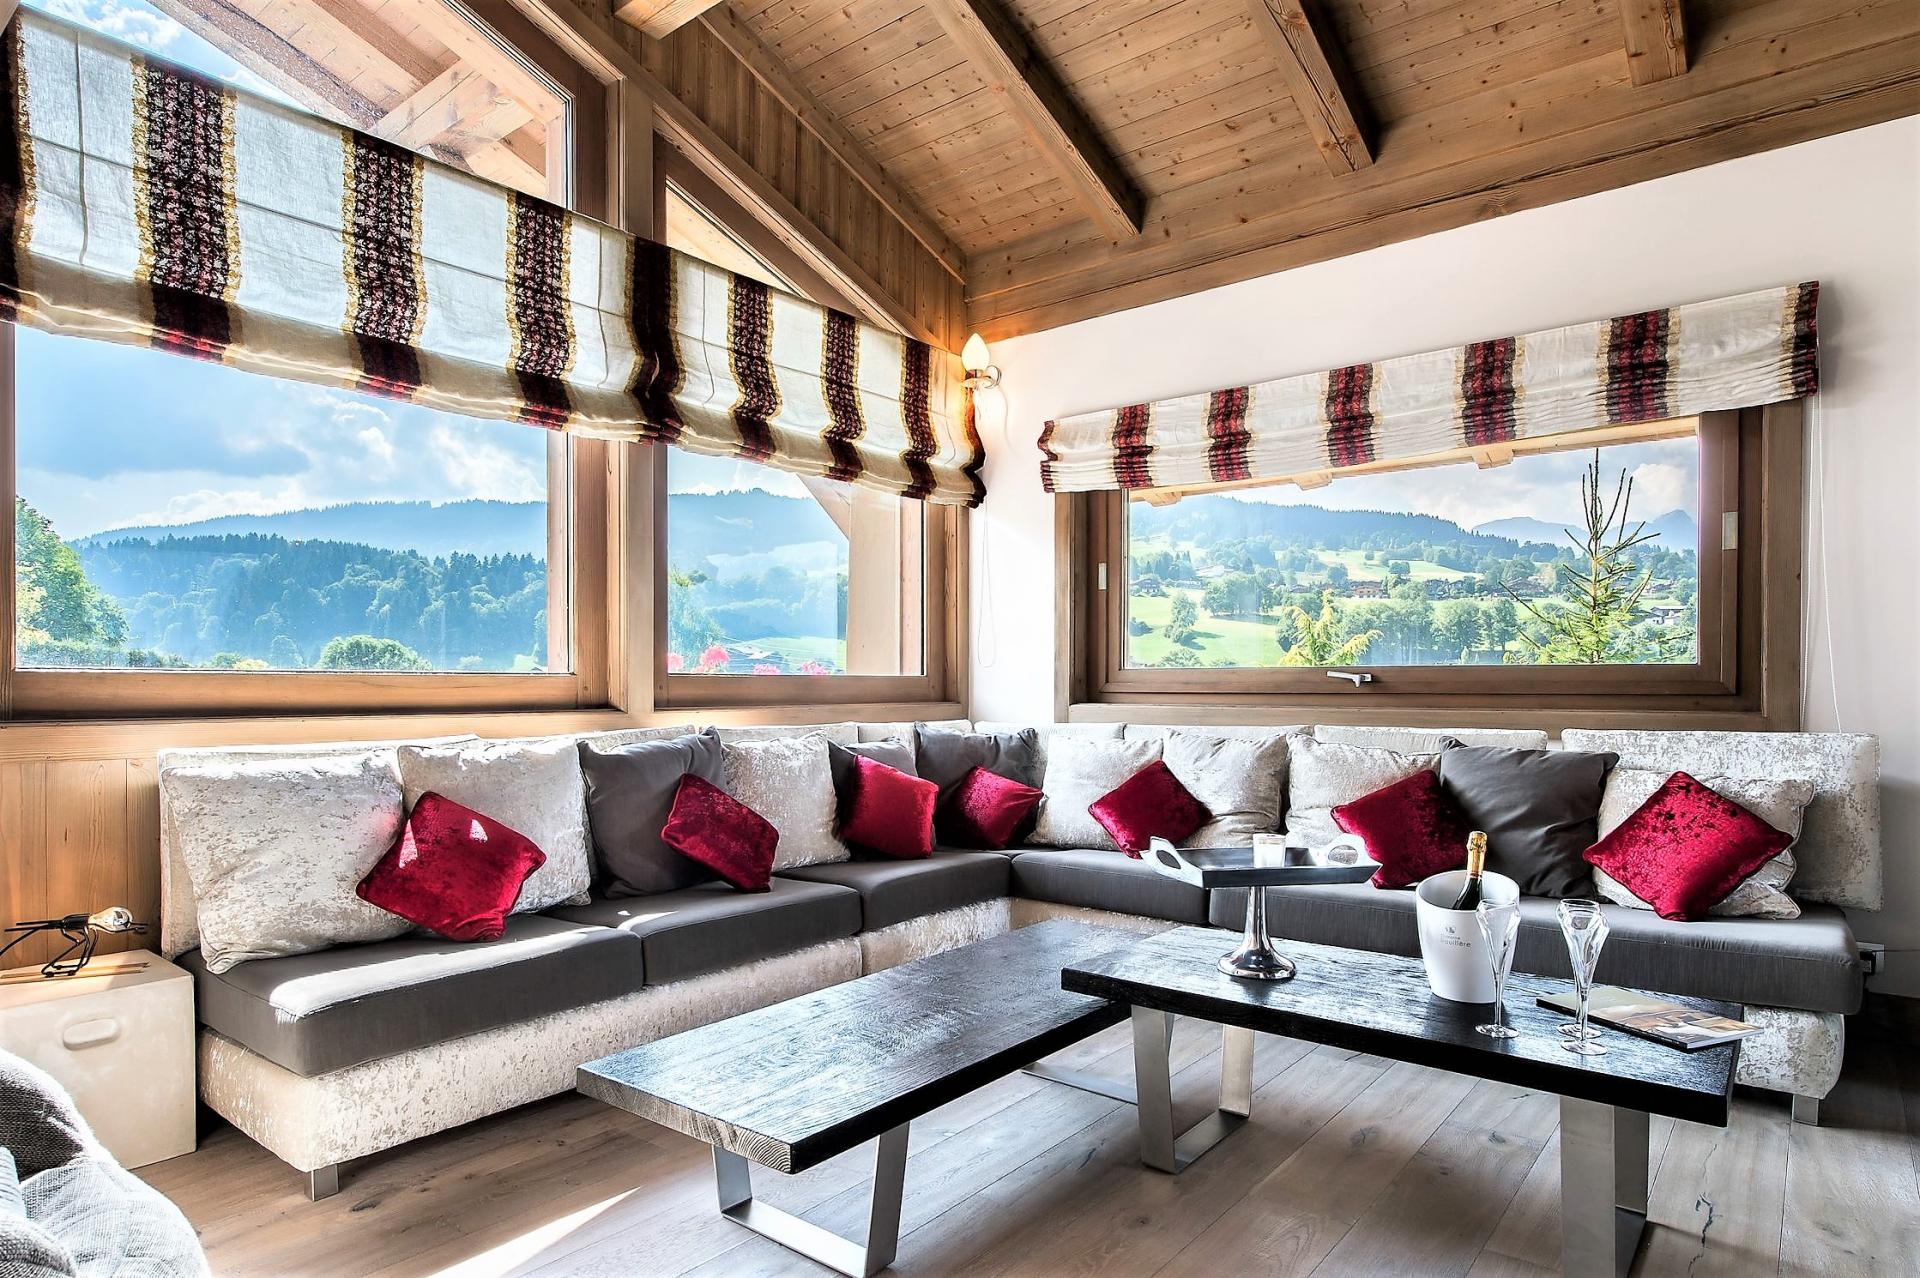 THE LOUNGE AND ITS BEAUTIFUL MOUNTAINS VIEWS IN A CHALET IN FRENCH ALPS